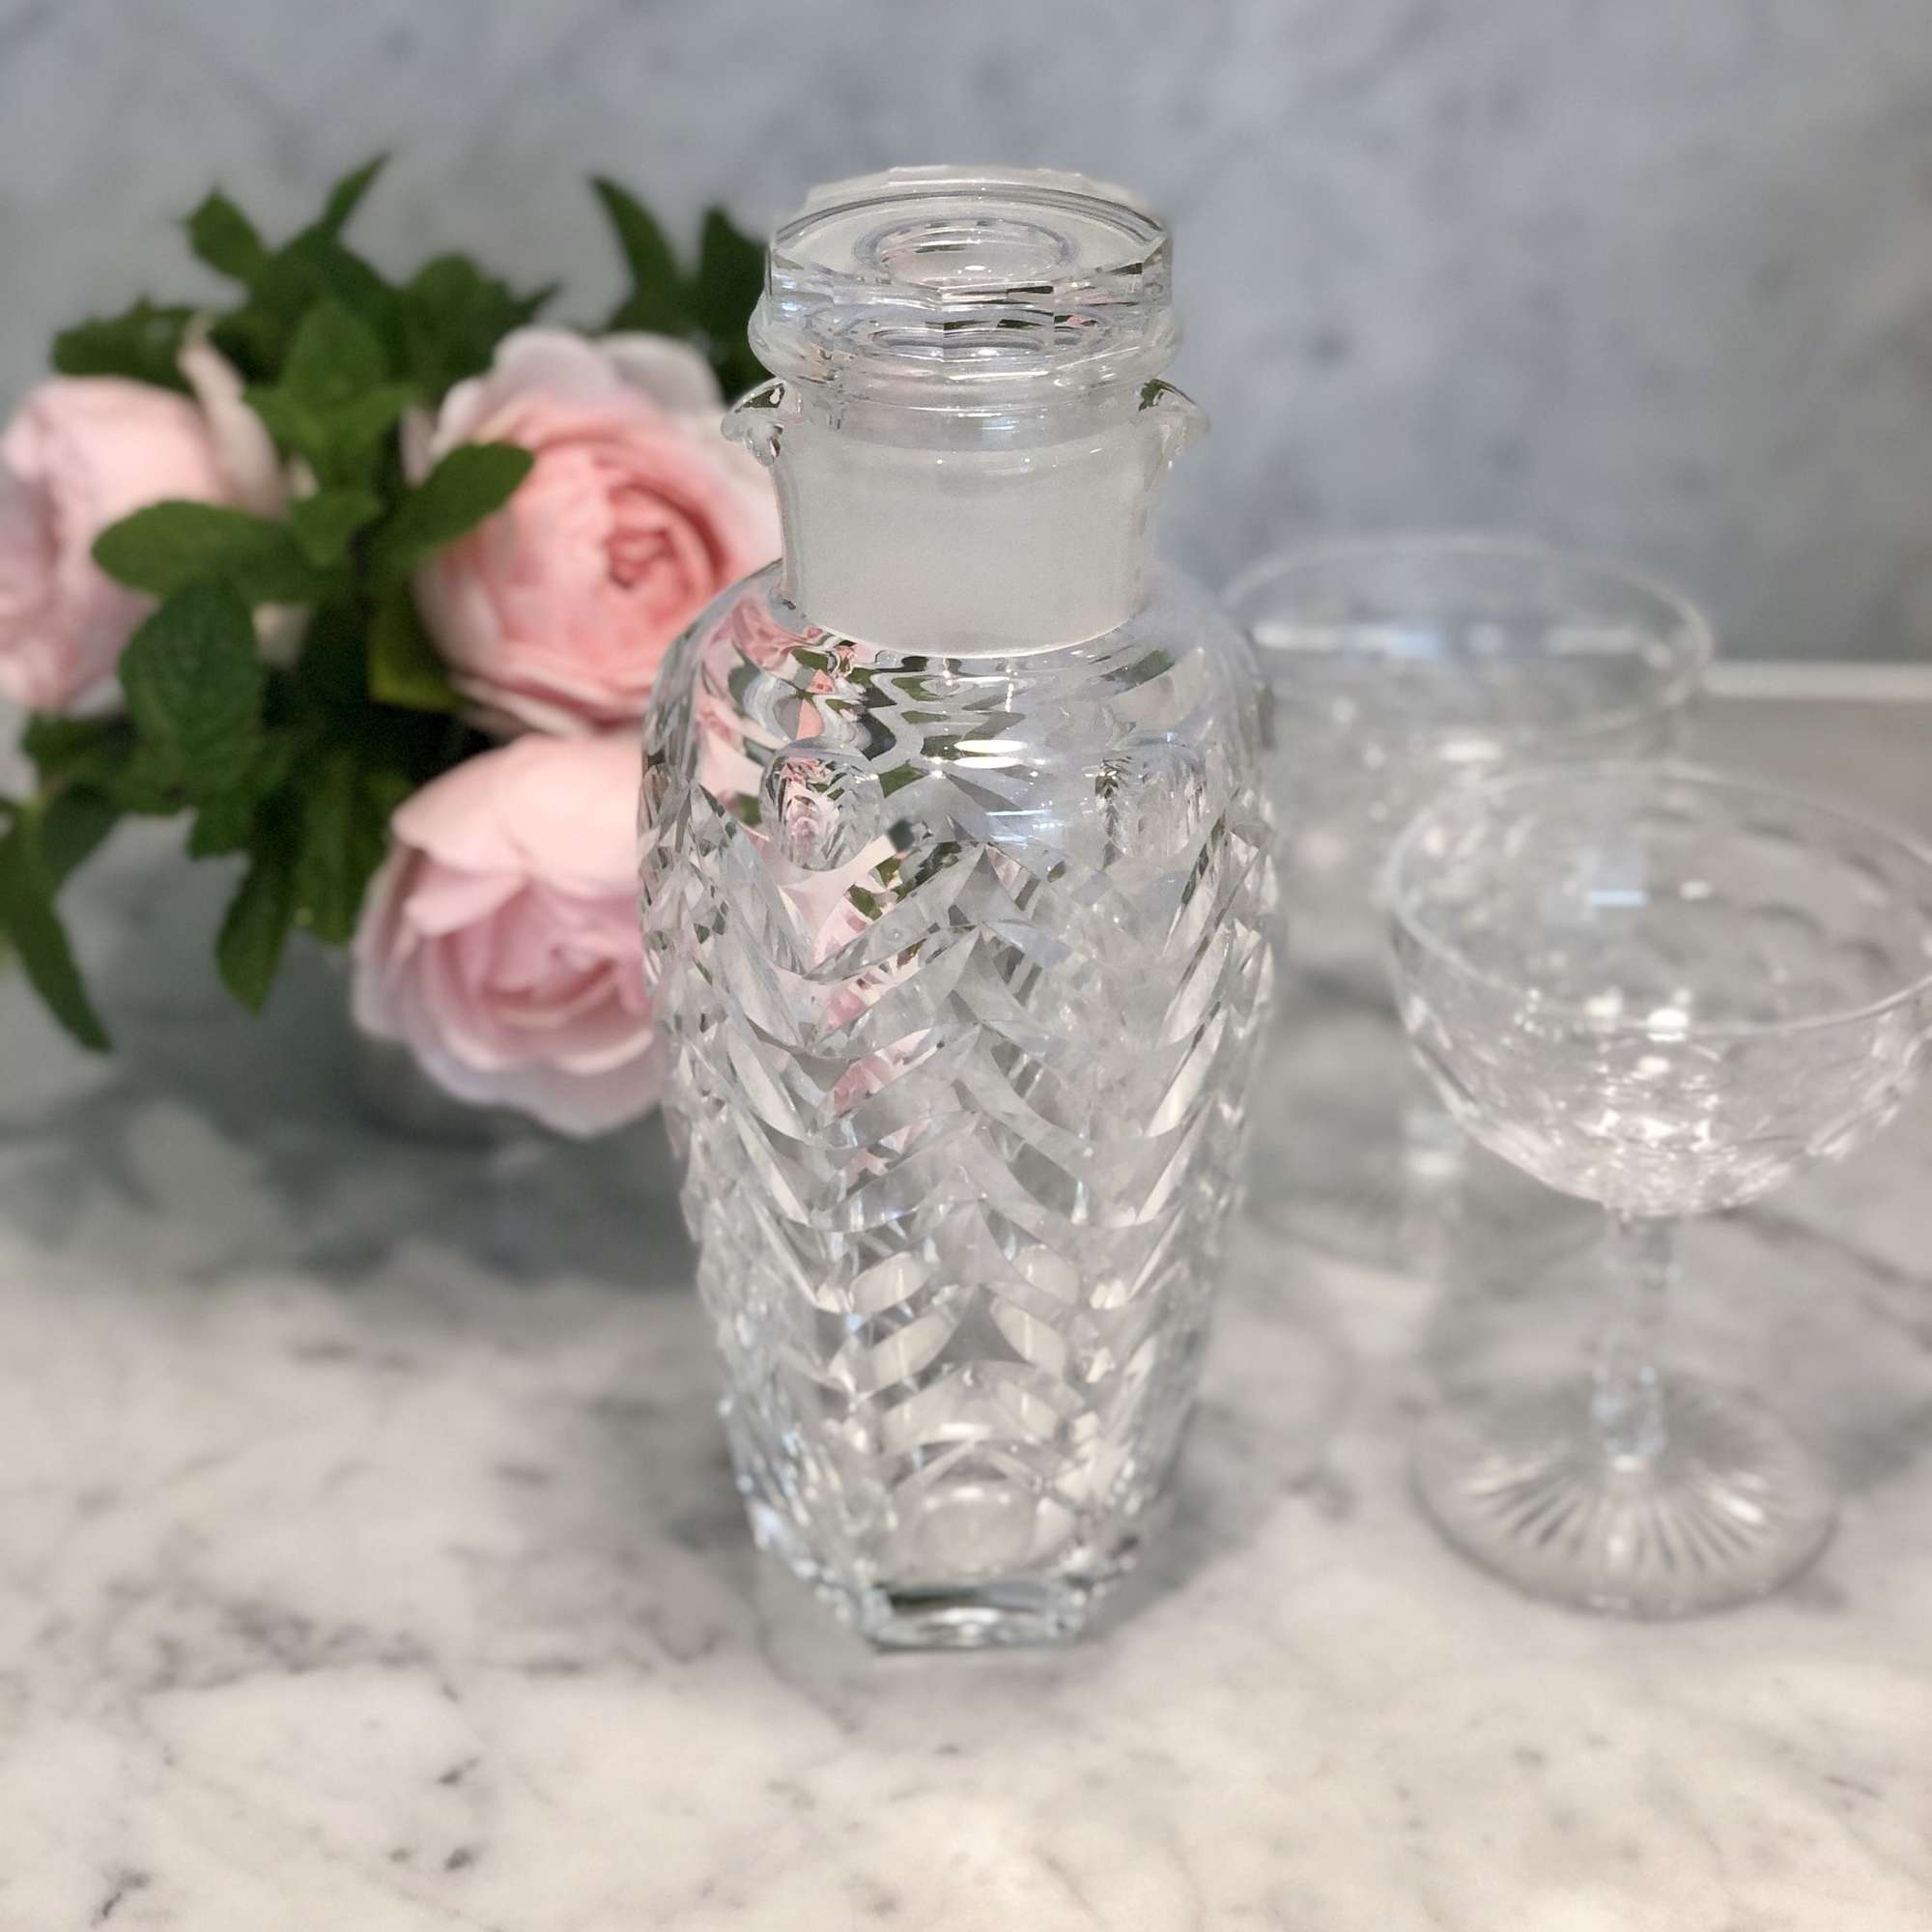 Exquisite cut crystal cocktail shaker decanter